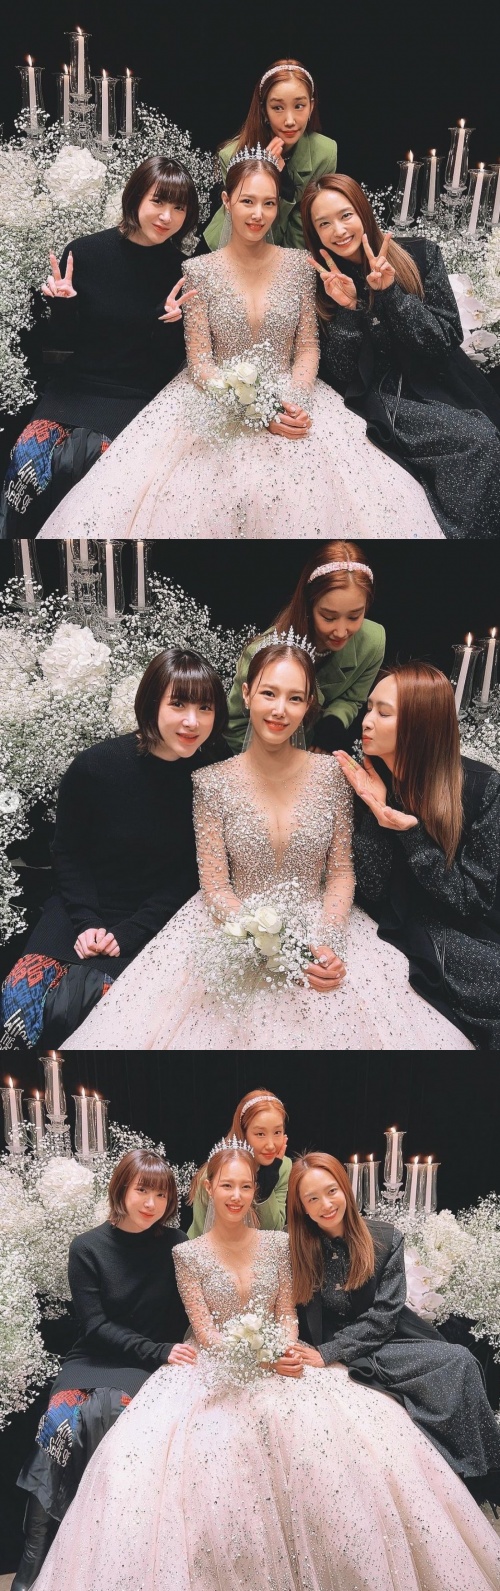 Singer Seo In-young has unveiled Kim Eunjungs wedding commemorative group Jewelry Full.Seo In-young posted on his personal SNS on the 17th, Today, our most beautiful Eunjung in the world! Congratulations ~ Happy! # My sisters shed tears and # Eunjung does not shed tears.In the photo released together, Kim Eunjung wearing a pure white wedding dress in the brides waiting room and Seo In-young, Park Jung-a and Ha Ju-yeon pose next to it are shown.A friendly atmosphere.On the other hand, Kim Eunjung rang the wedding march with Lim Kwang-wook, the representative producer of Divine Channel, at the Seoul location on the 16th.The two men who met with the common denominator of music and raised love made fruit of becoming a couple after eight years of devotion.Seo In-young Instagram